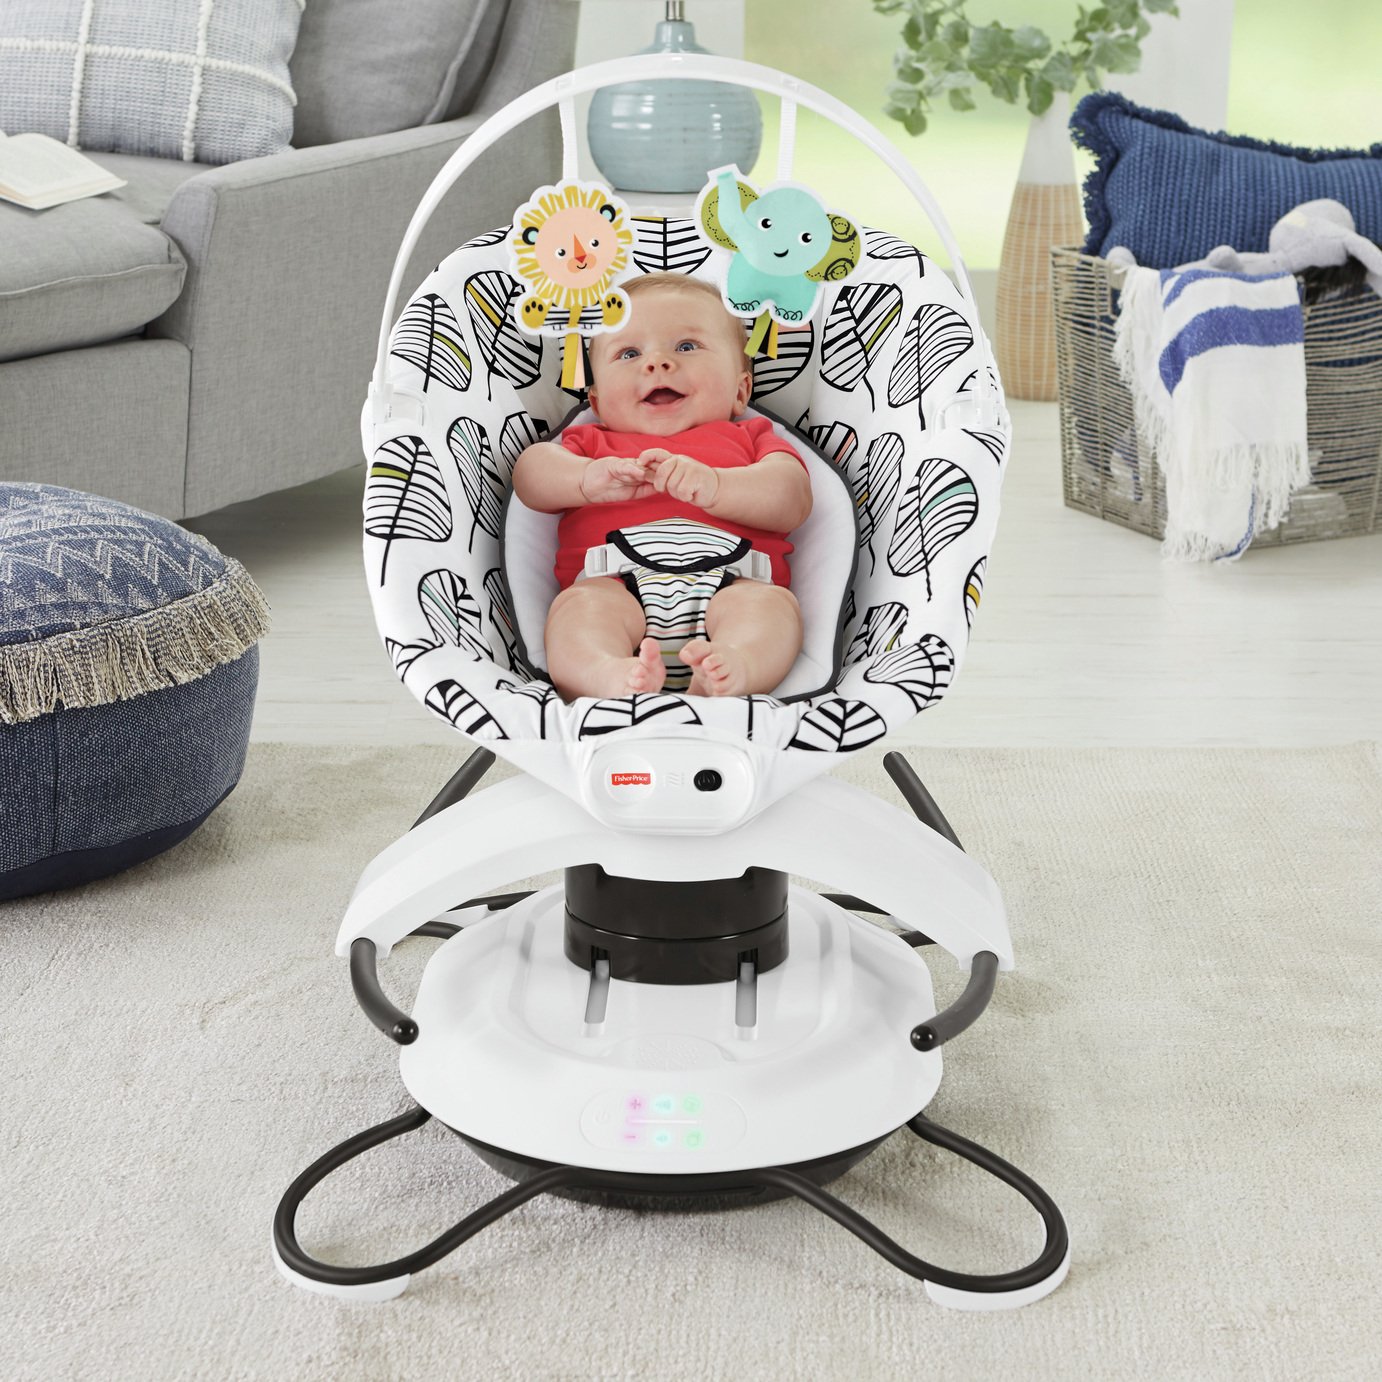 Fisher-Price 2-in-1 Soothe 'n Play Glider